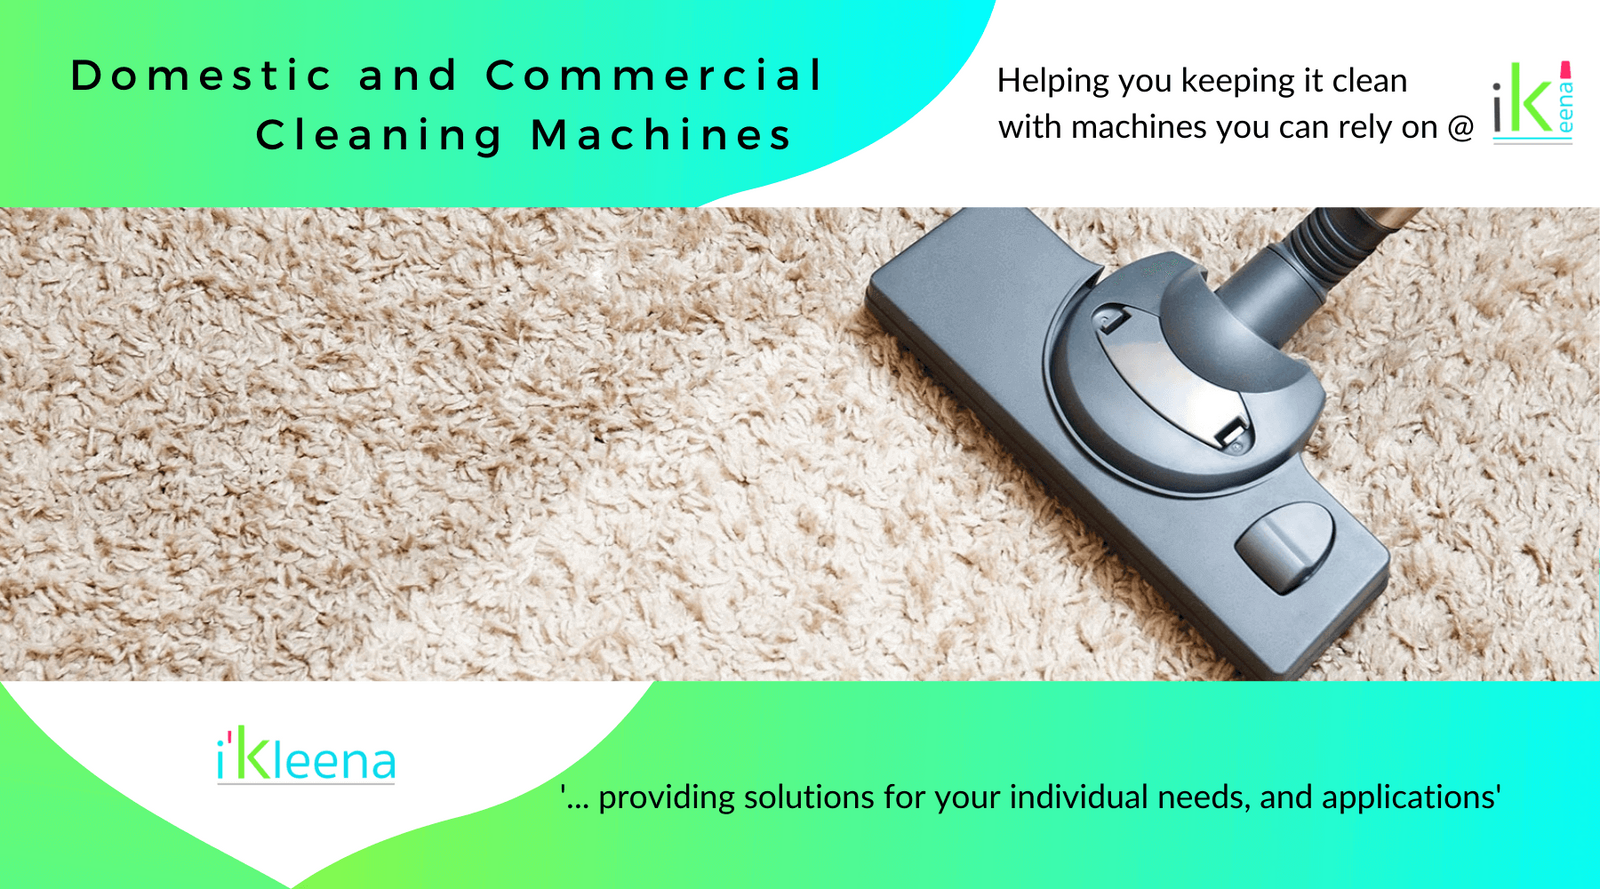 I Kleena Quality Janitorial Cleaning Machines Equipment Solutions